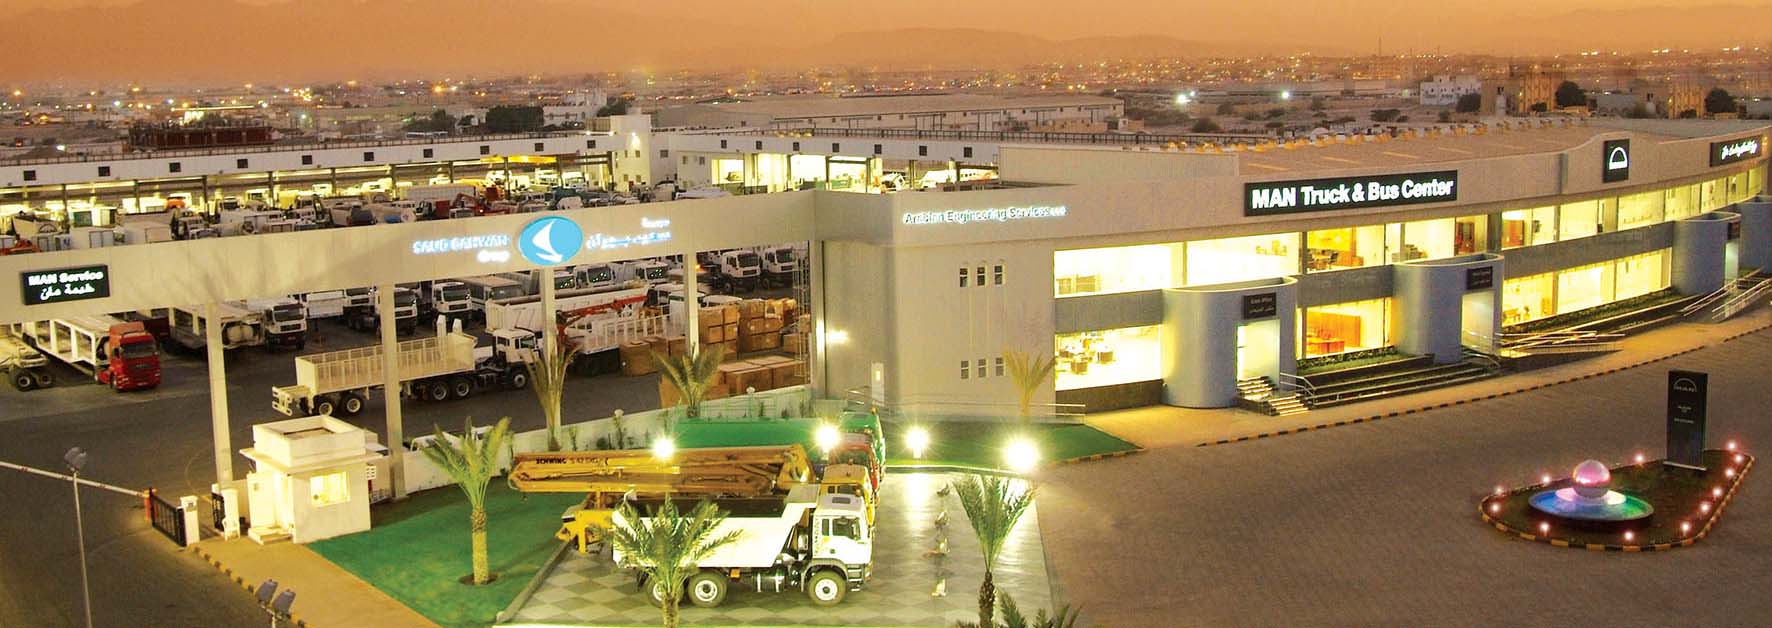 Saud Bahwan MAN's truck and bus centre exterior view